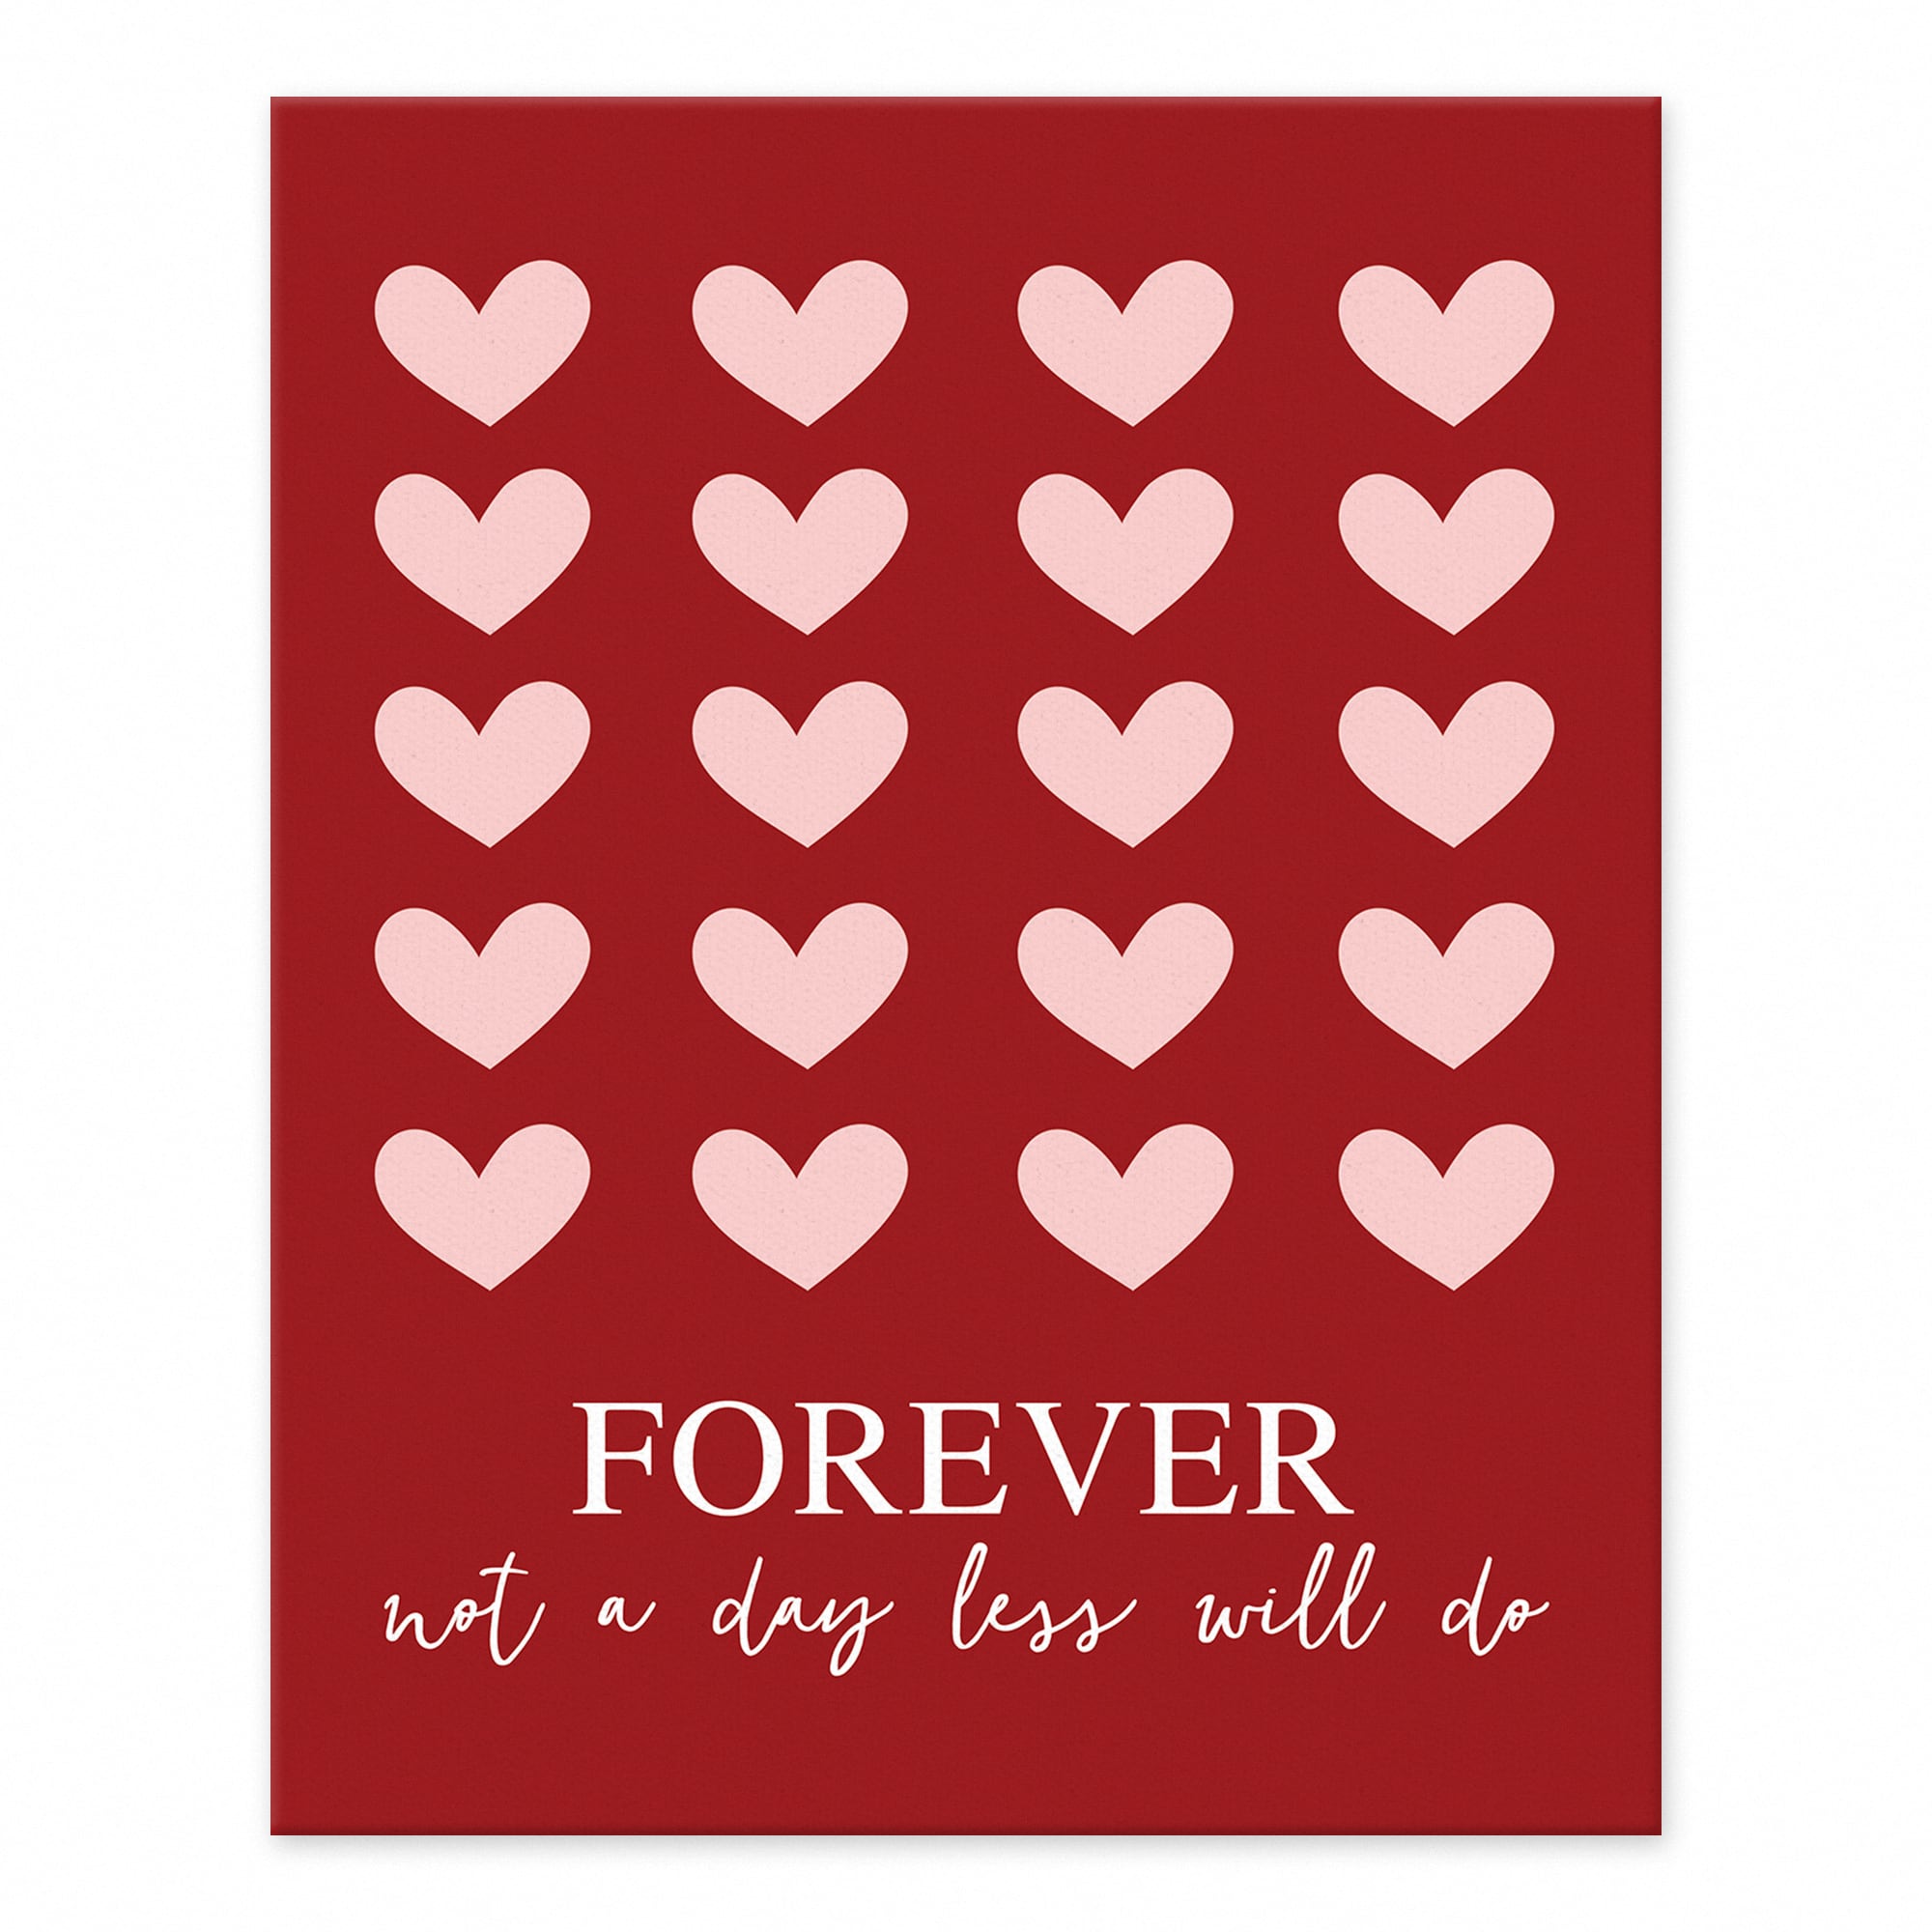 Forever, Not a Day Less with Hearts Tabletop Canvas Art